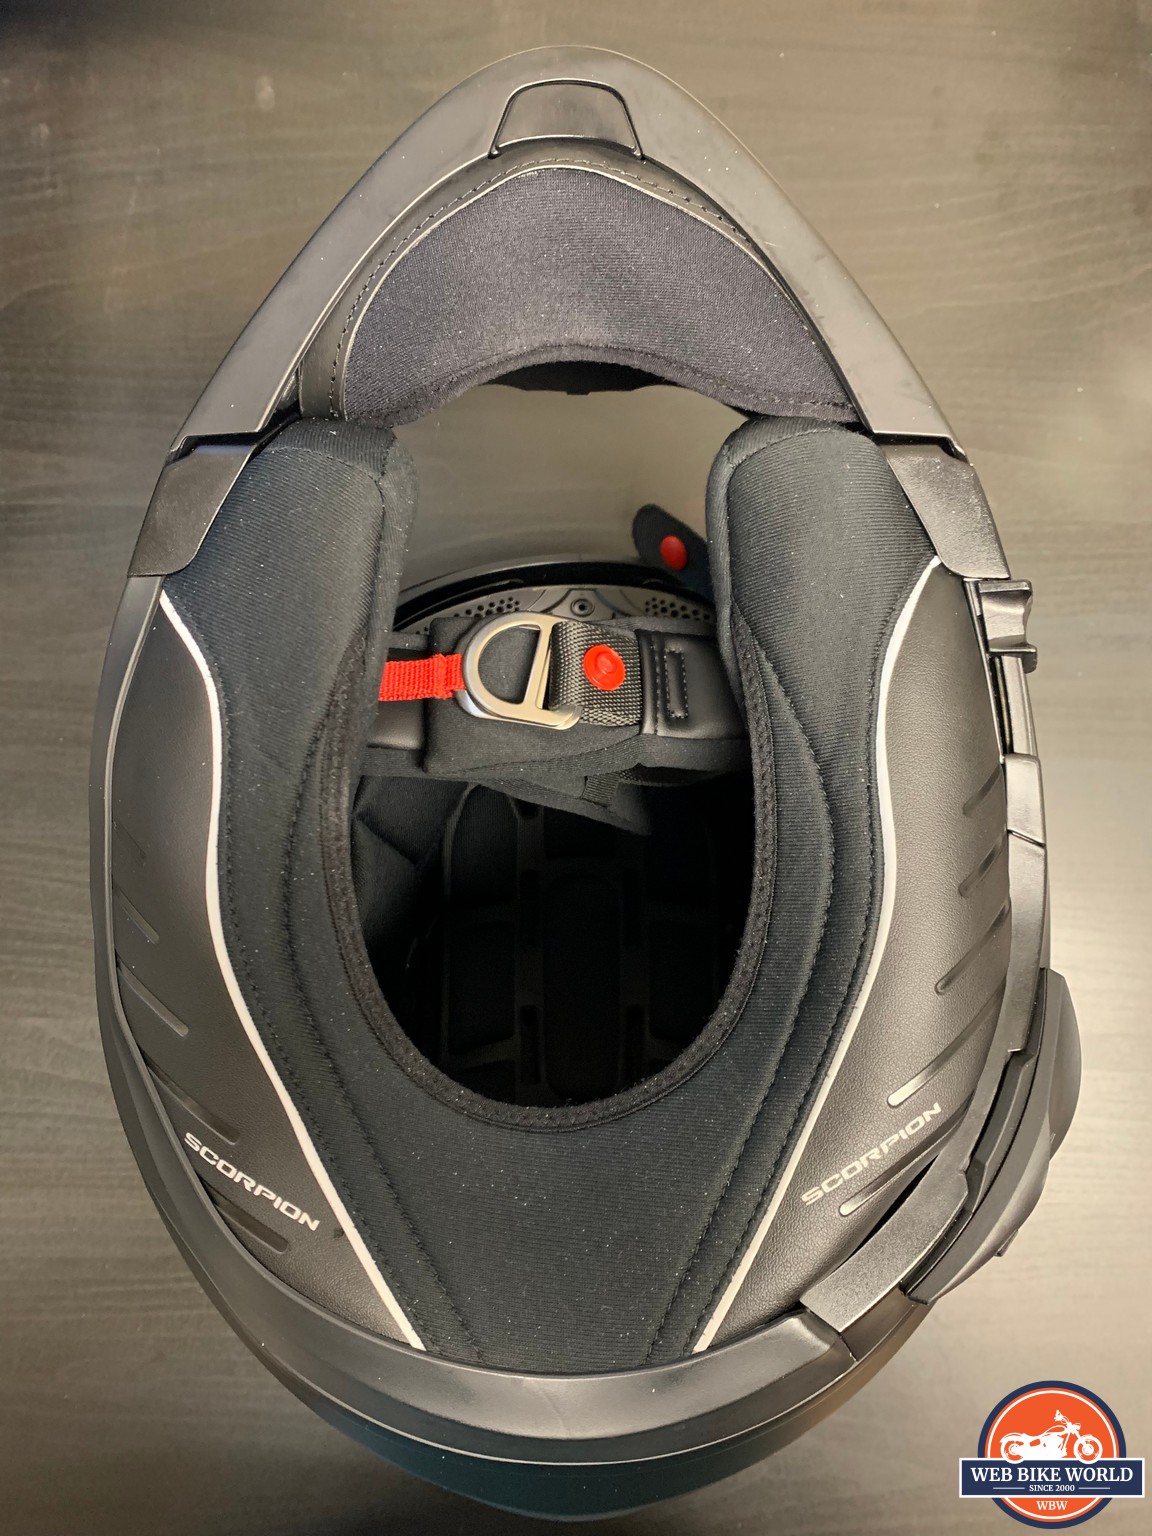 Bottom view of the EXO GT930 helmet showing interior padding